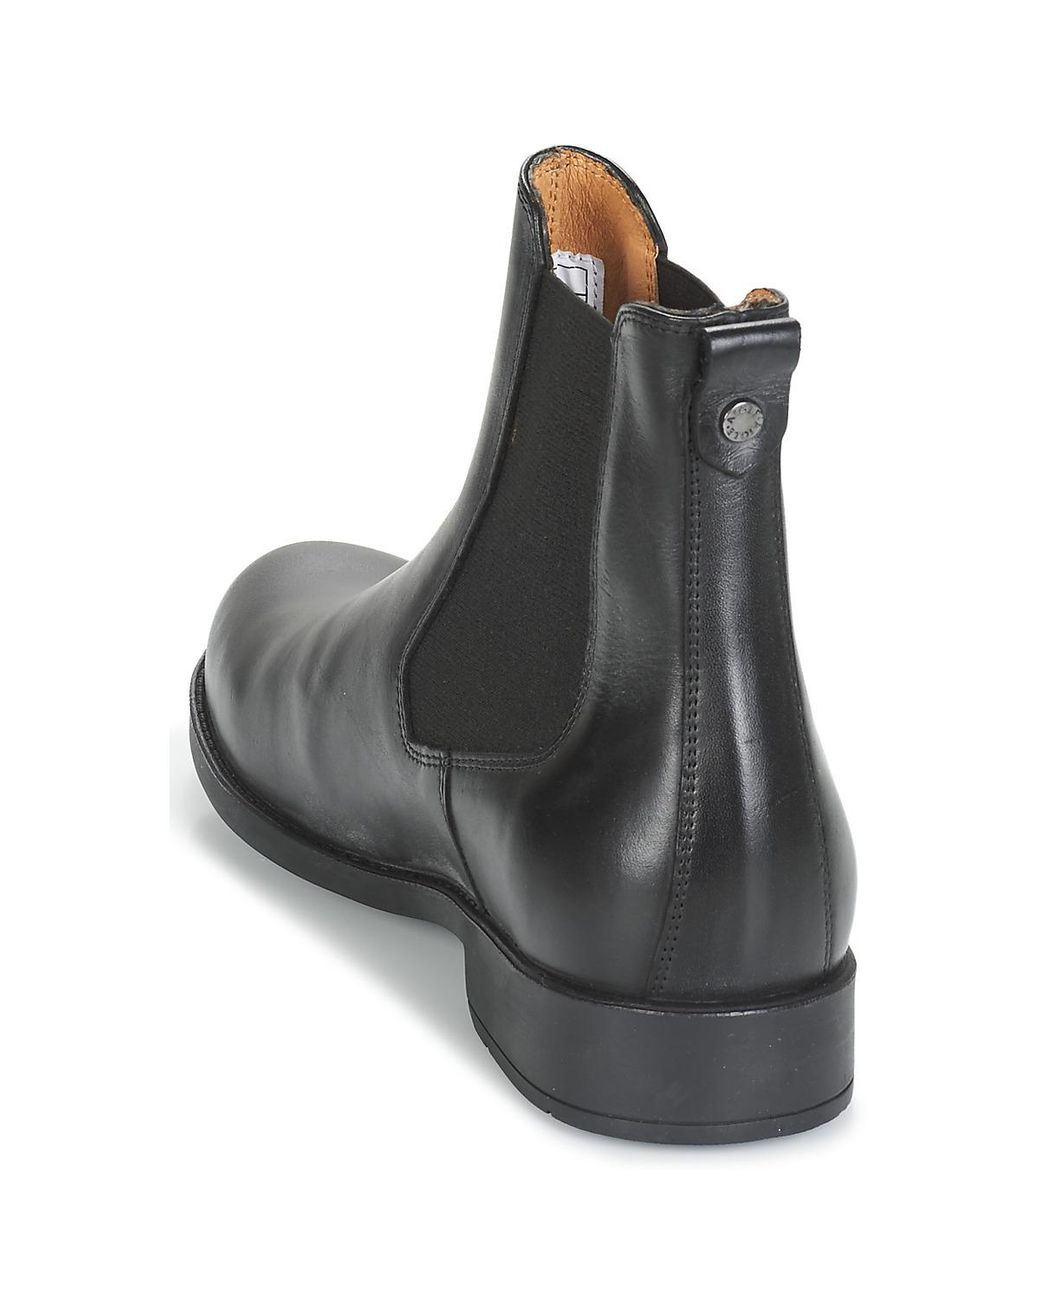 Aigle Leather Orzac W 2 Mid Boots in Black - Save 10% - Lyst